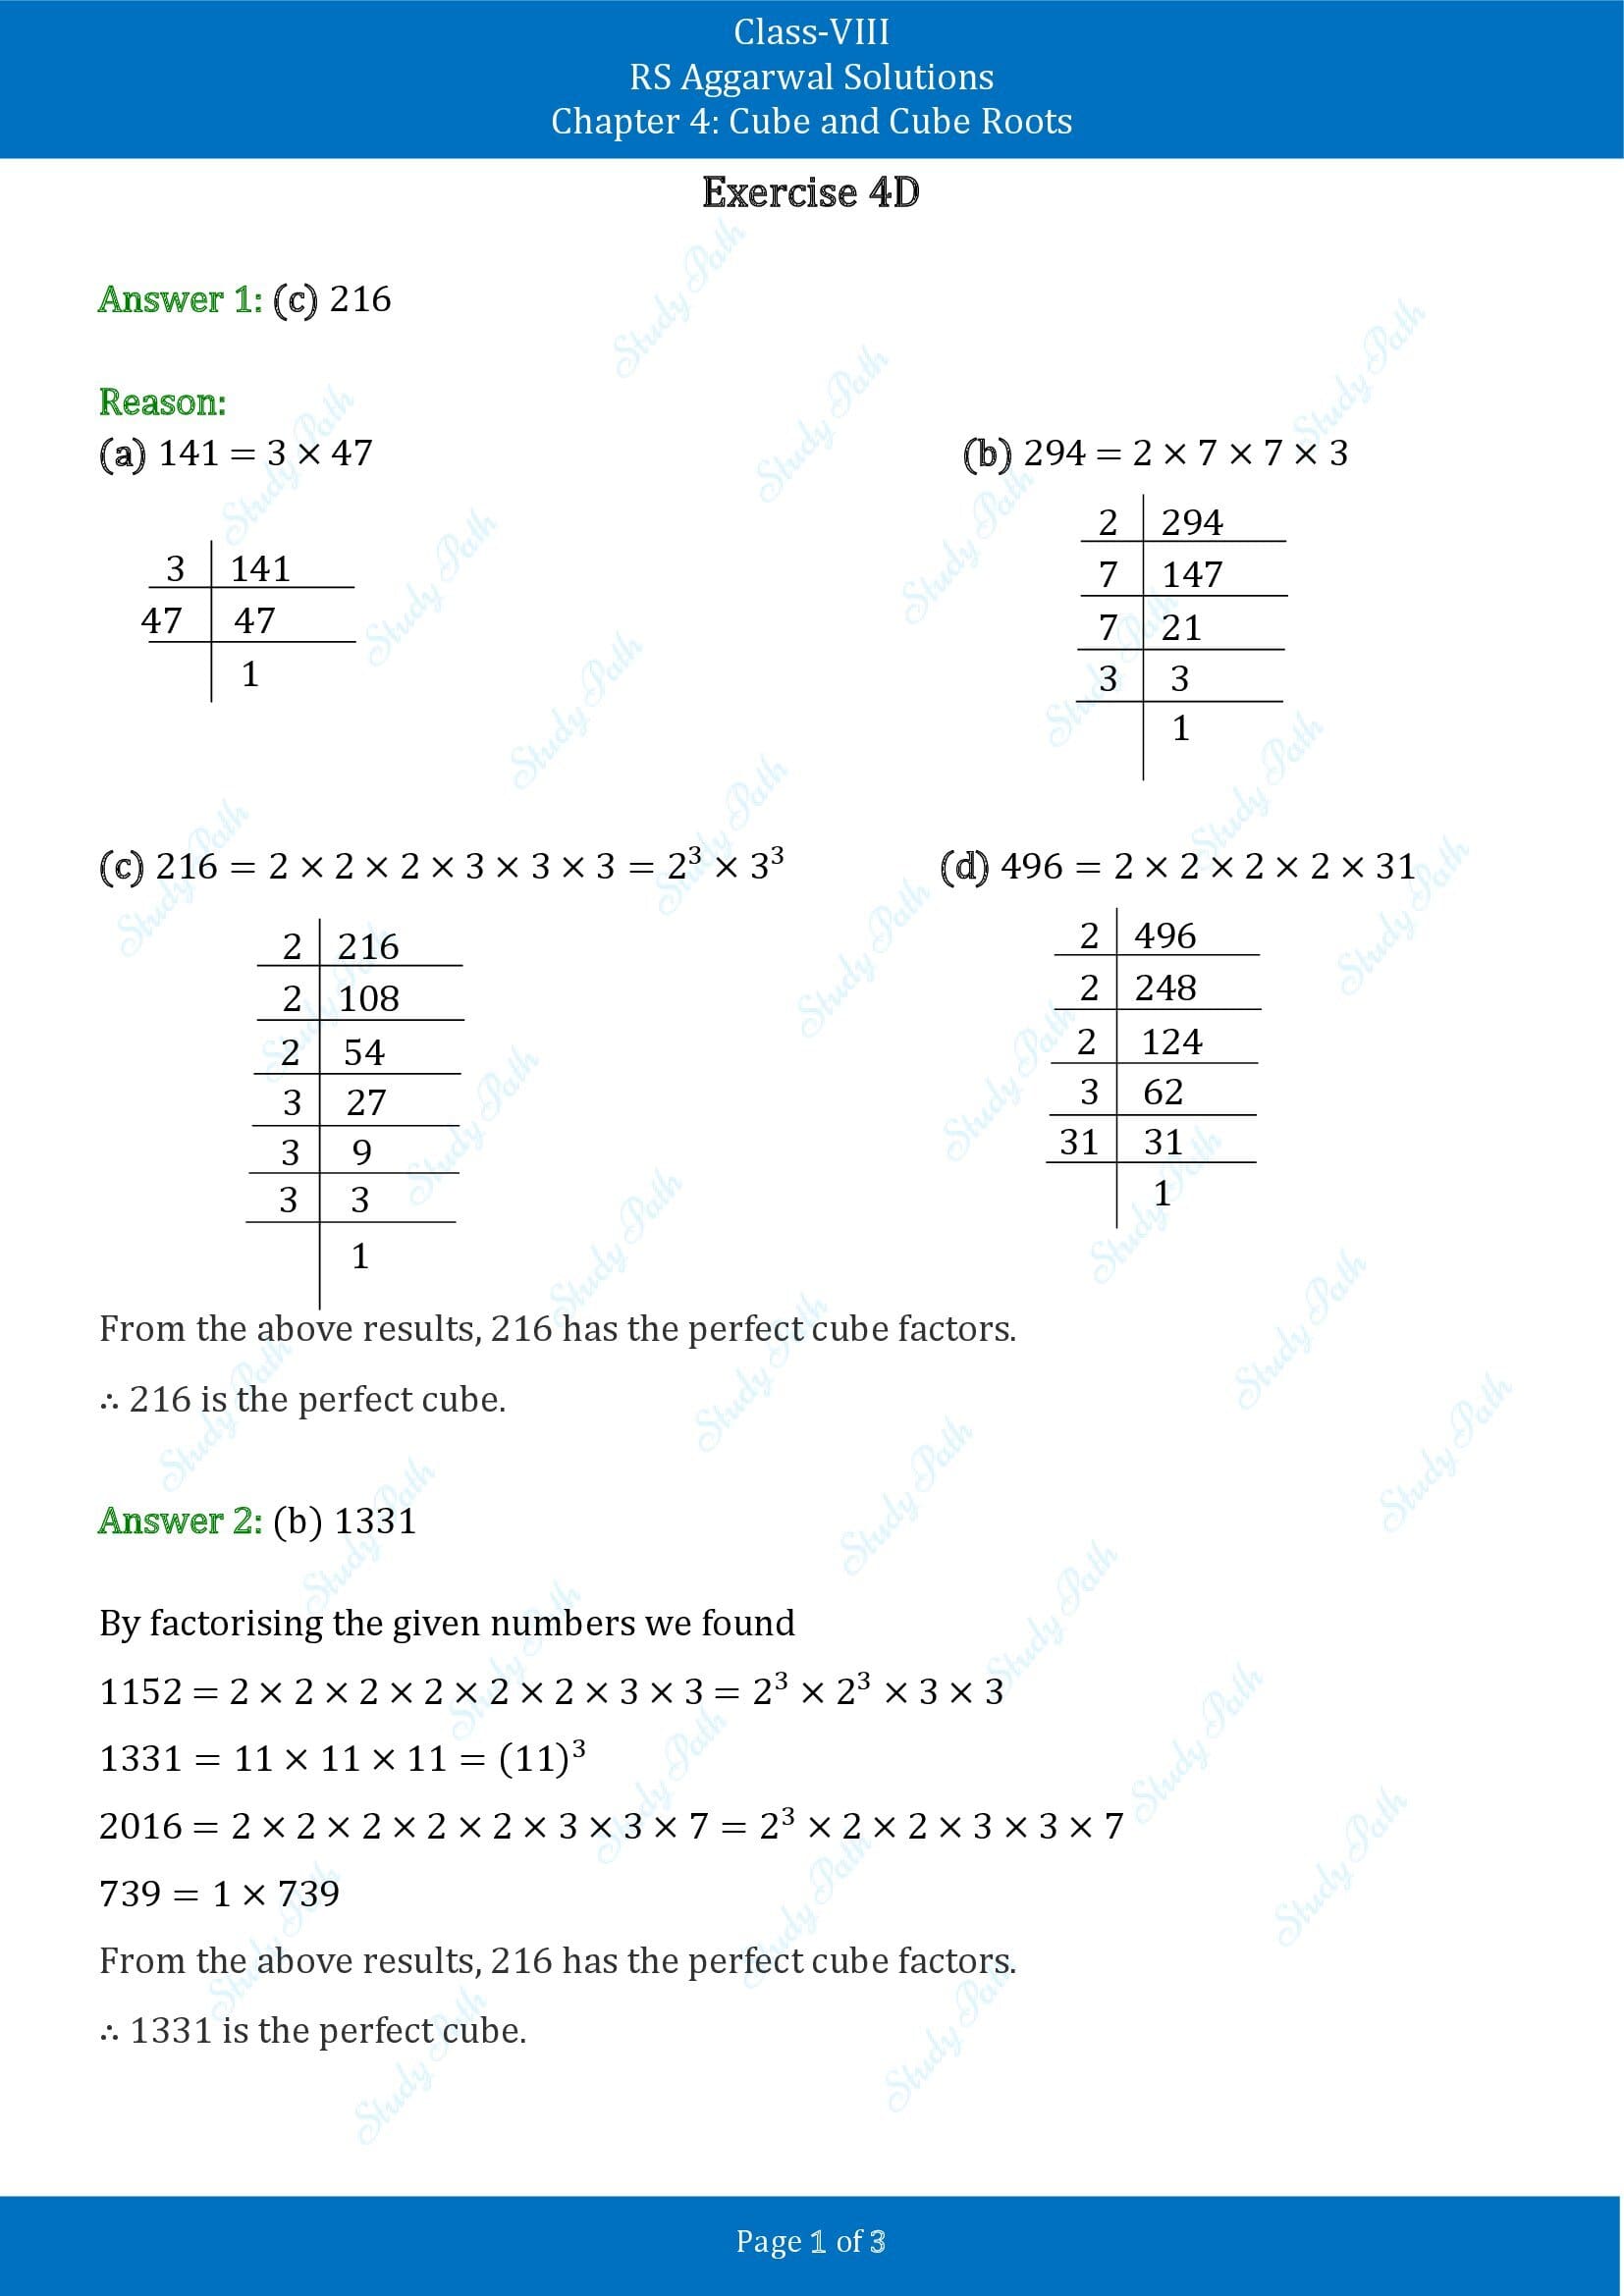 RS Aggarwal Solutions Class 8 Chapter 4 Cube and Cube Roots Exercise 4D MCQs 00001